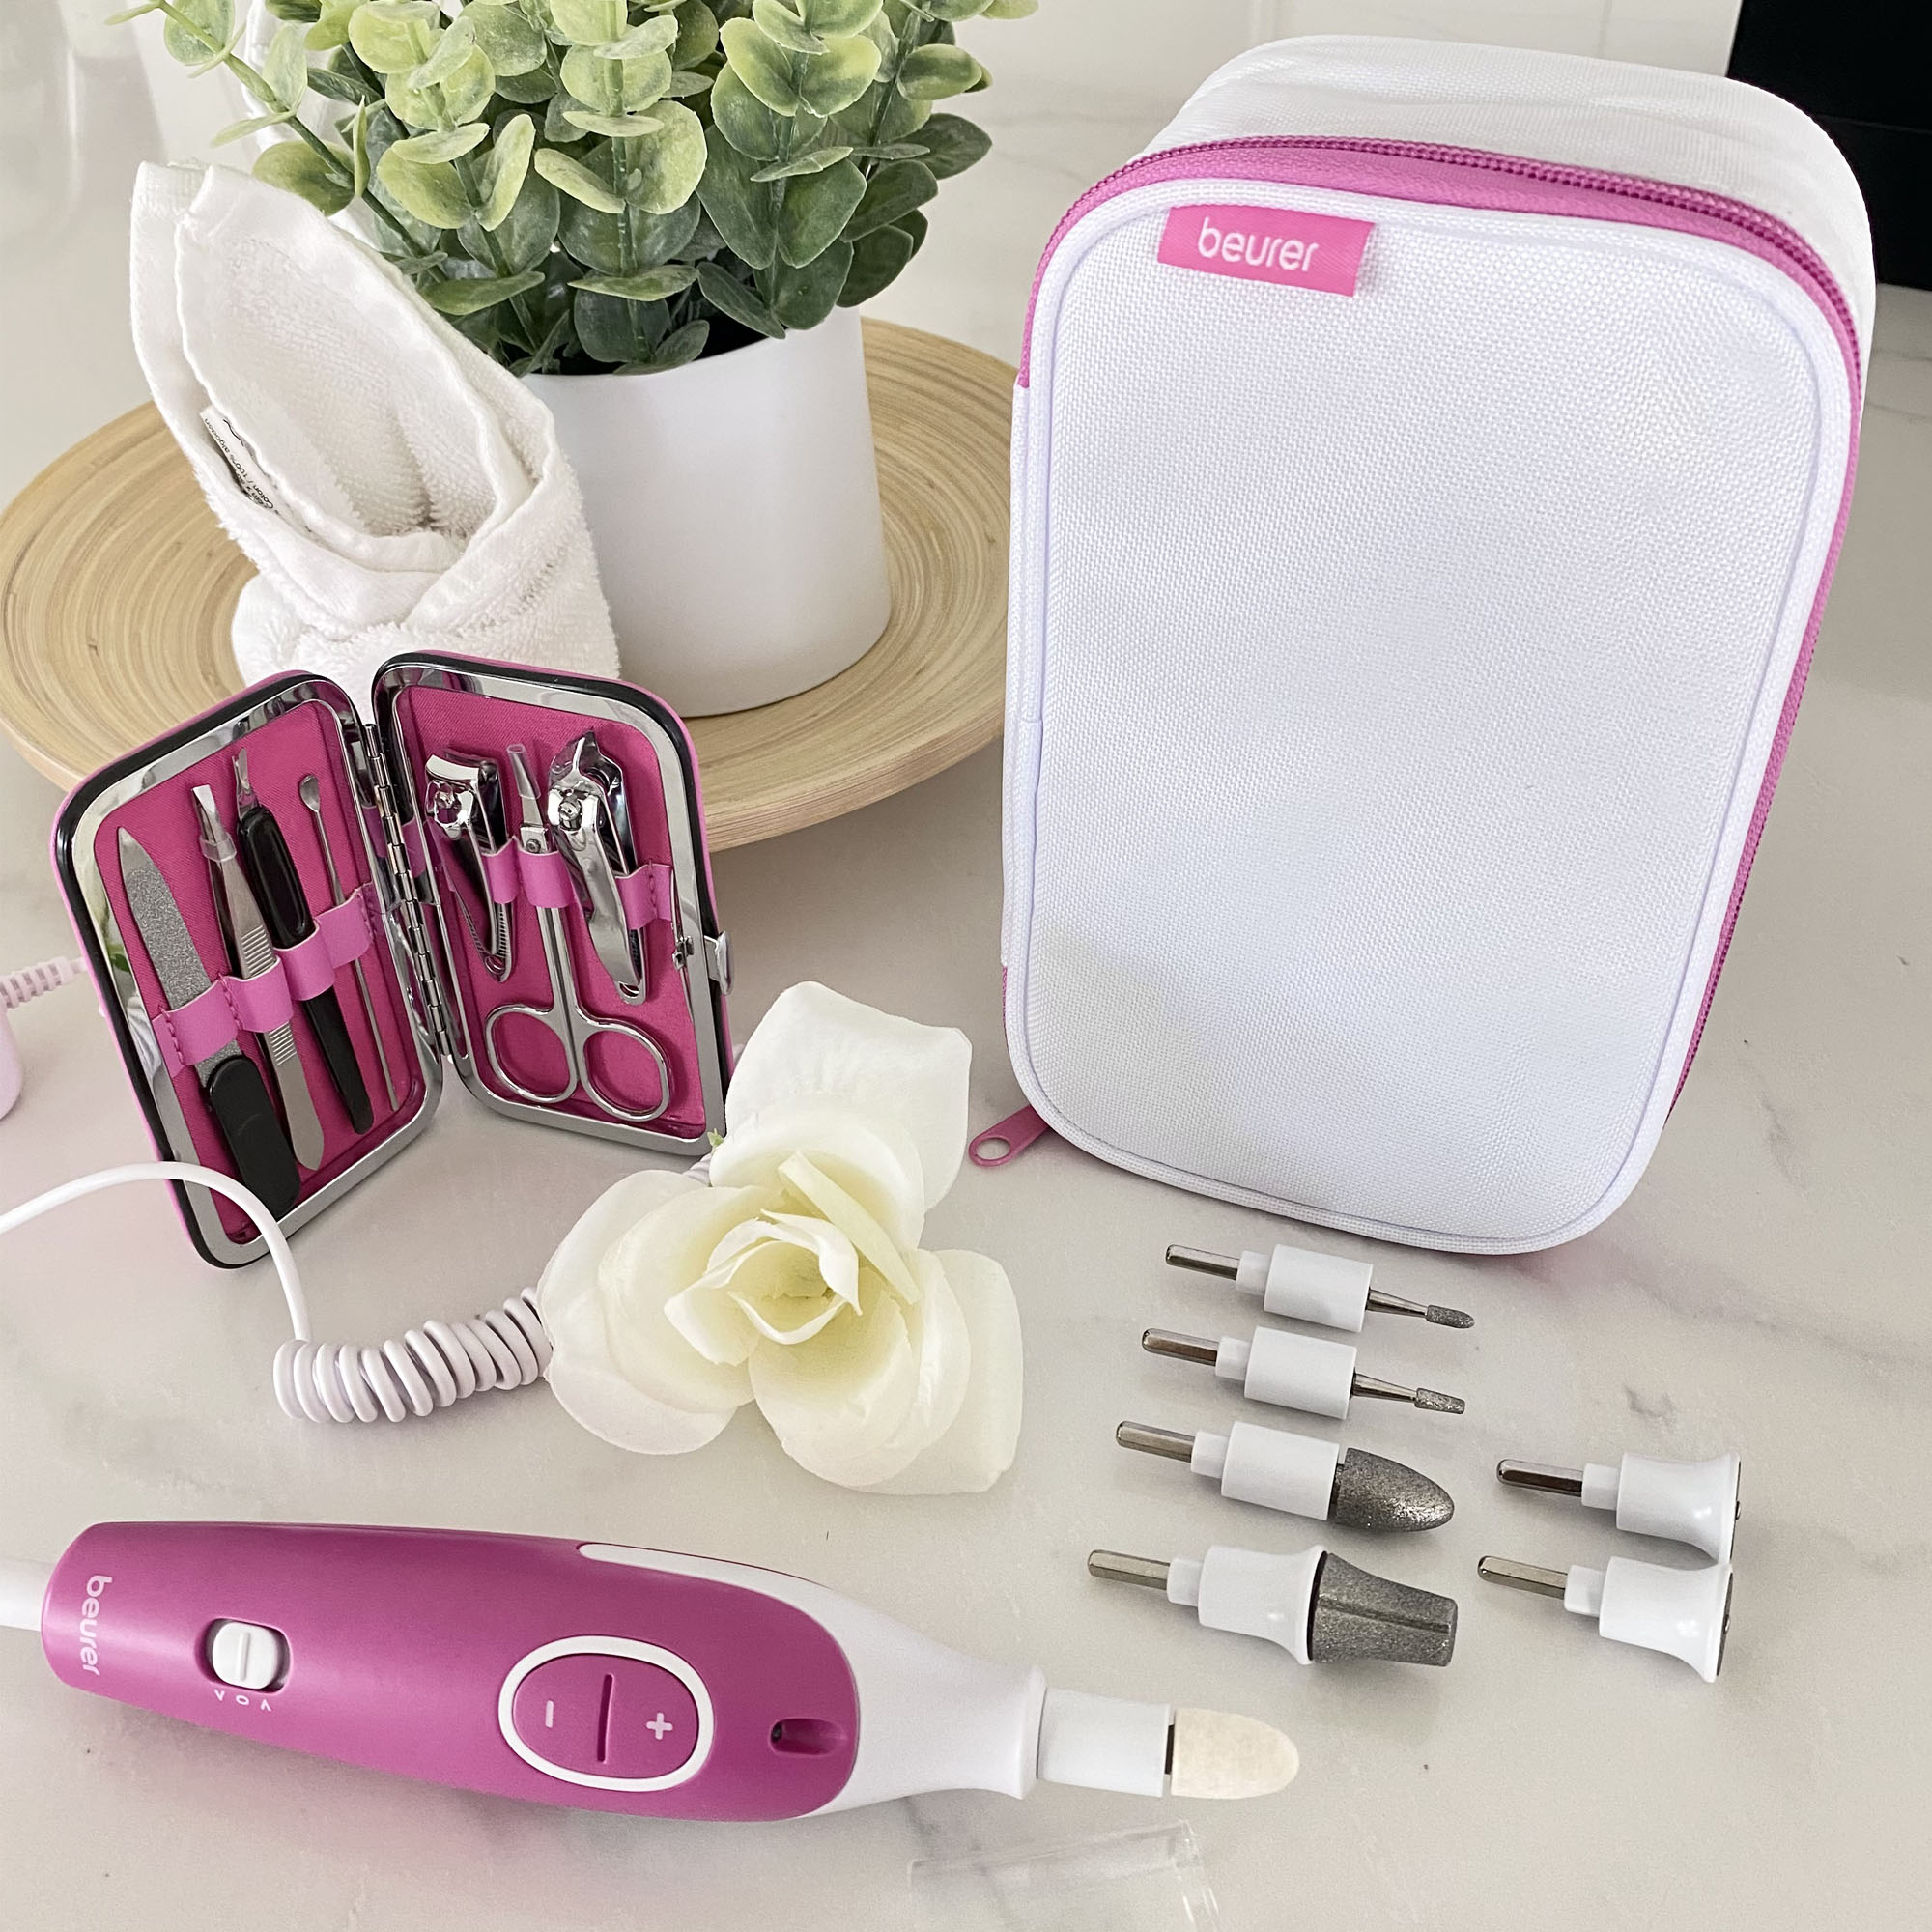 Beurer 18-piece Manicure/Pedicure Device and Nail Set Pink/White MP44 ...